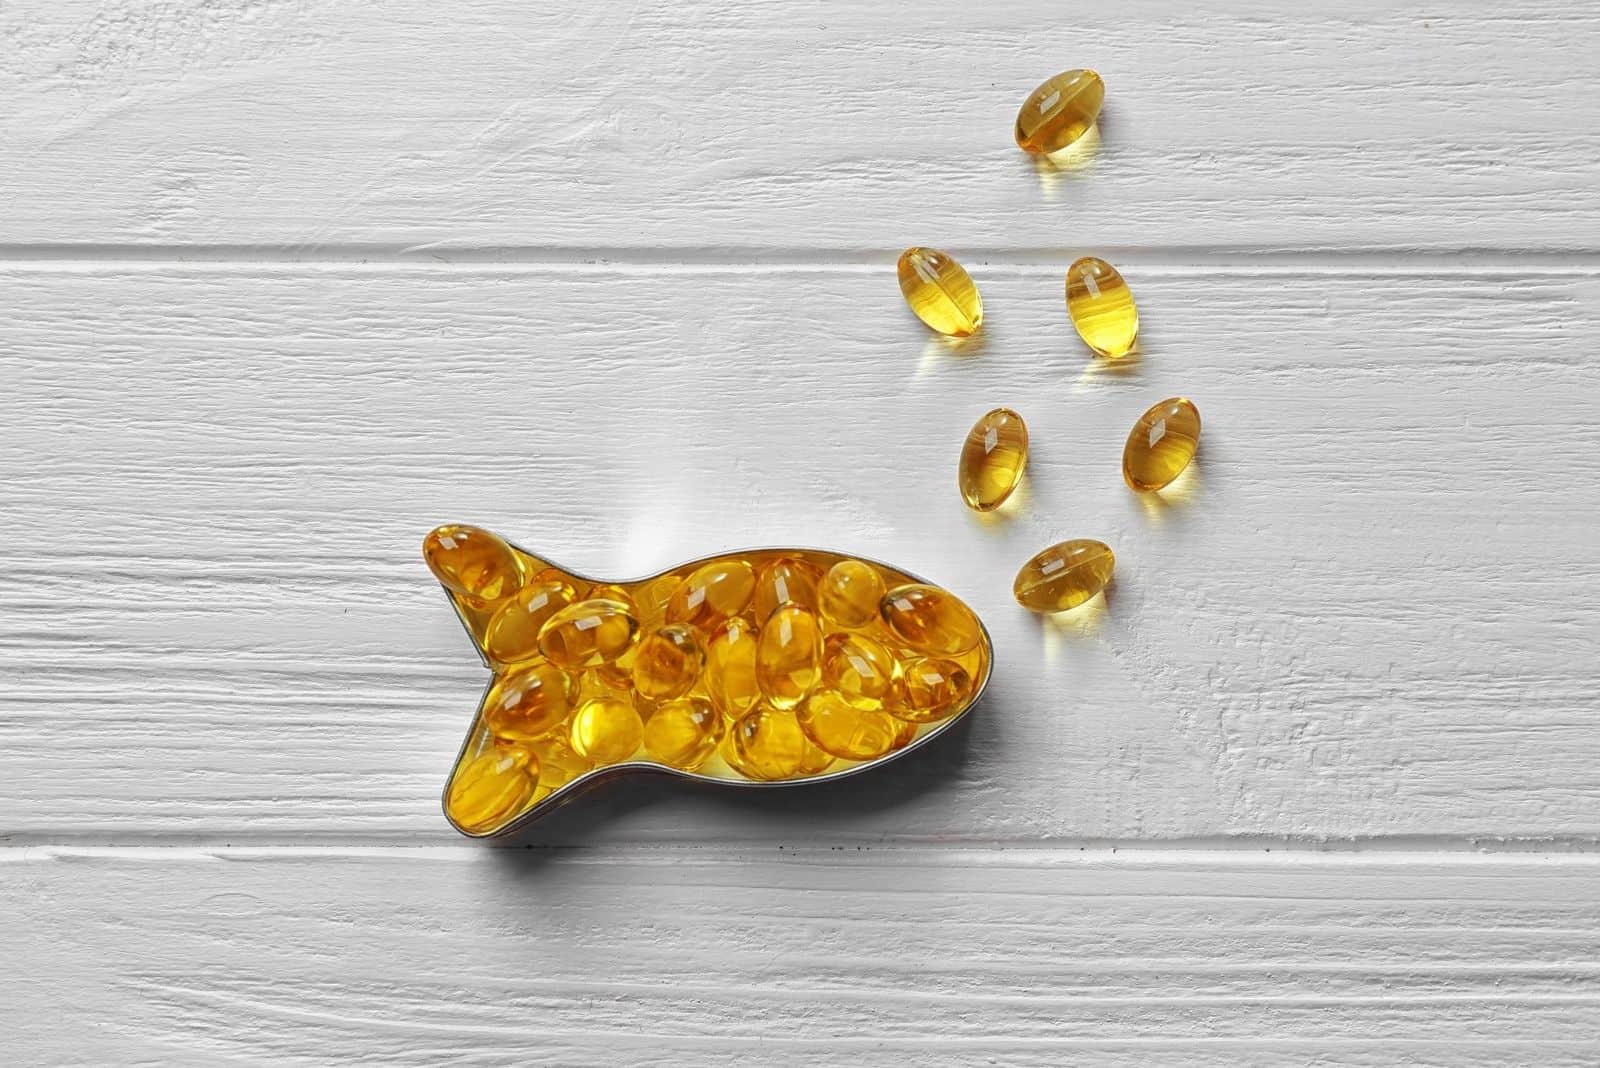 capsules of cod liver oil arranged in fish shape in a wooden table